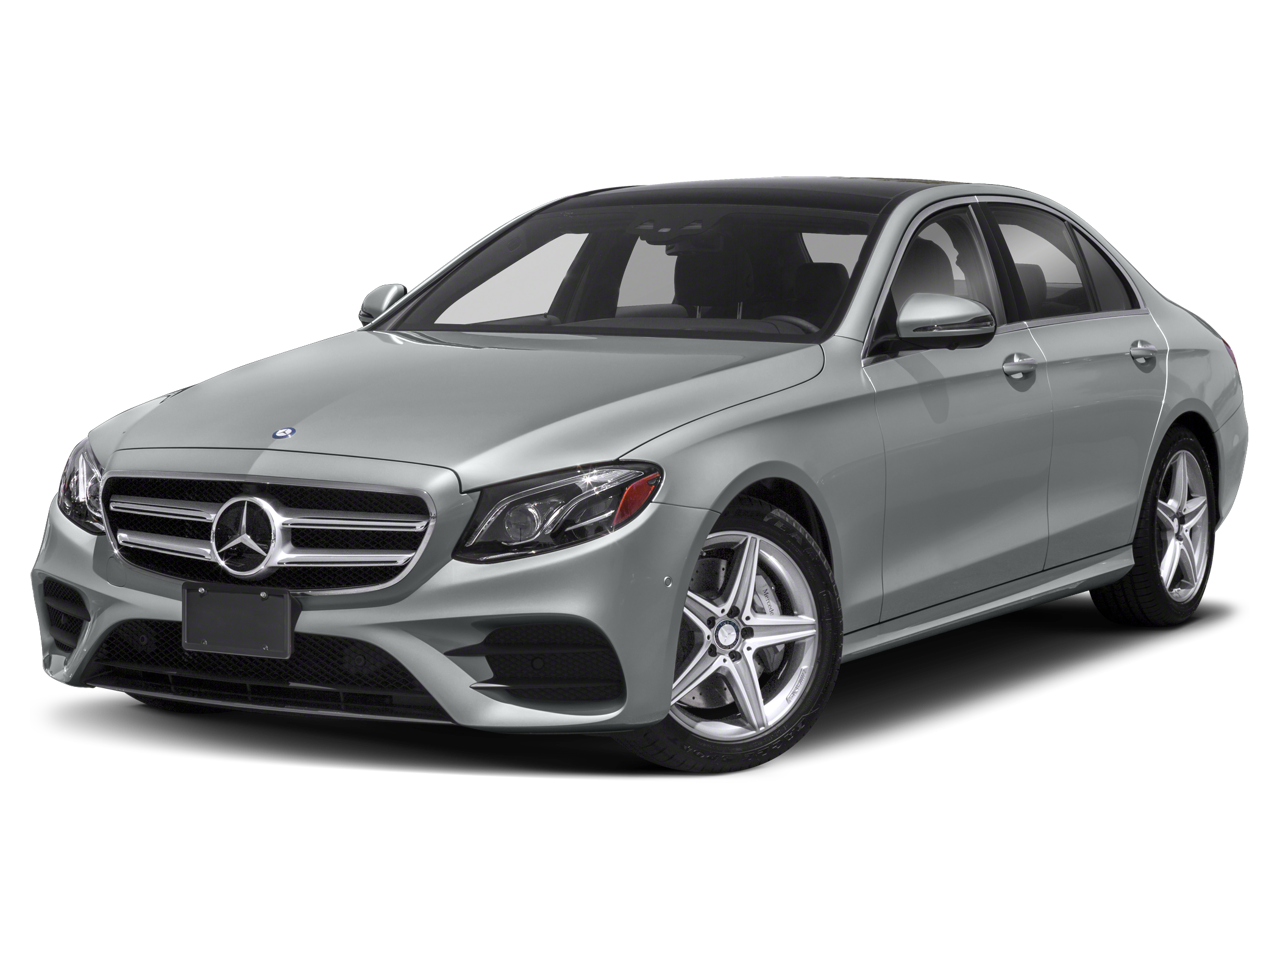 Used 2019 Mercedes-Benz E-Class E300 with VIN WDDZF4KB2KA628107 for sale in Bloomington, Minnesota